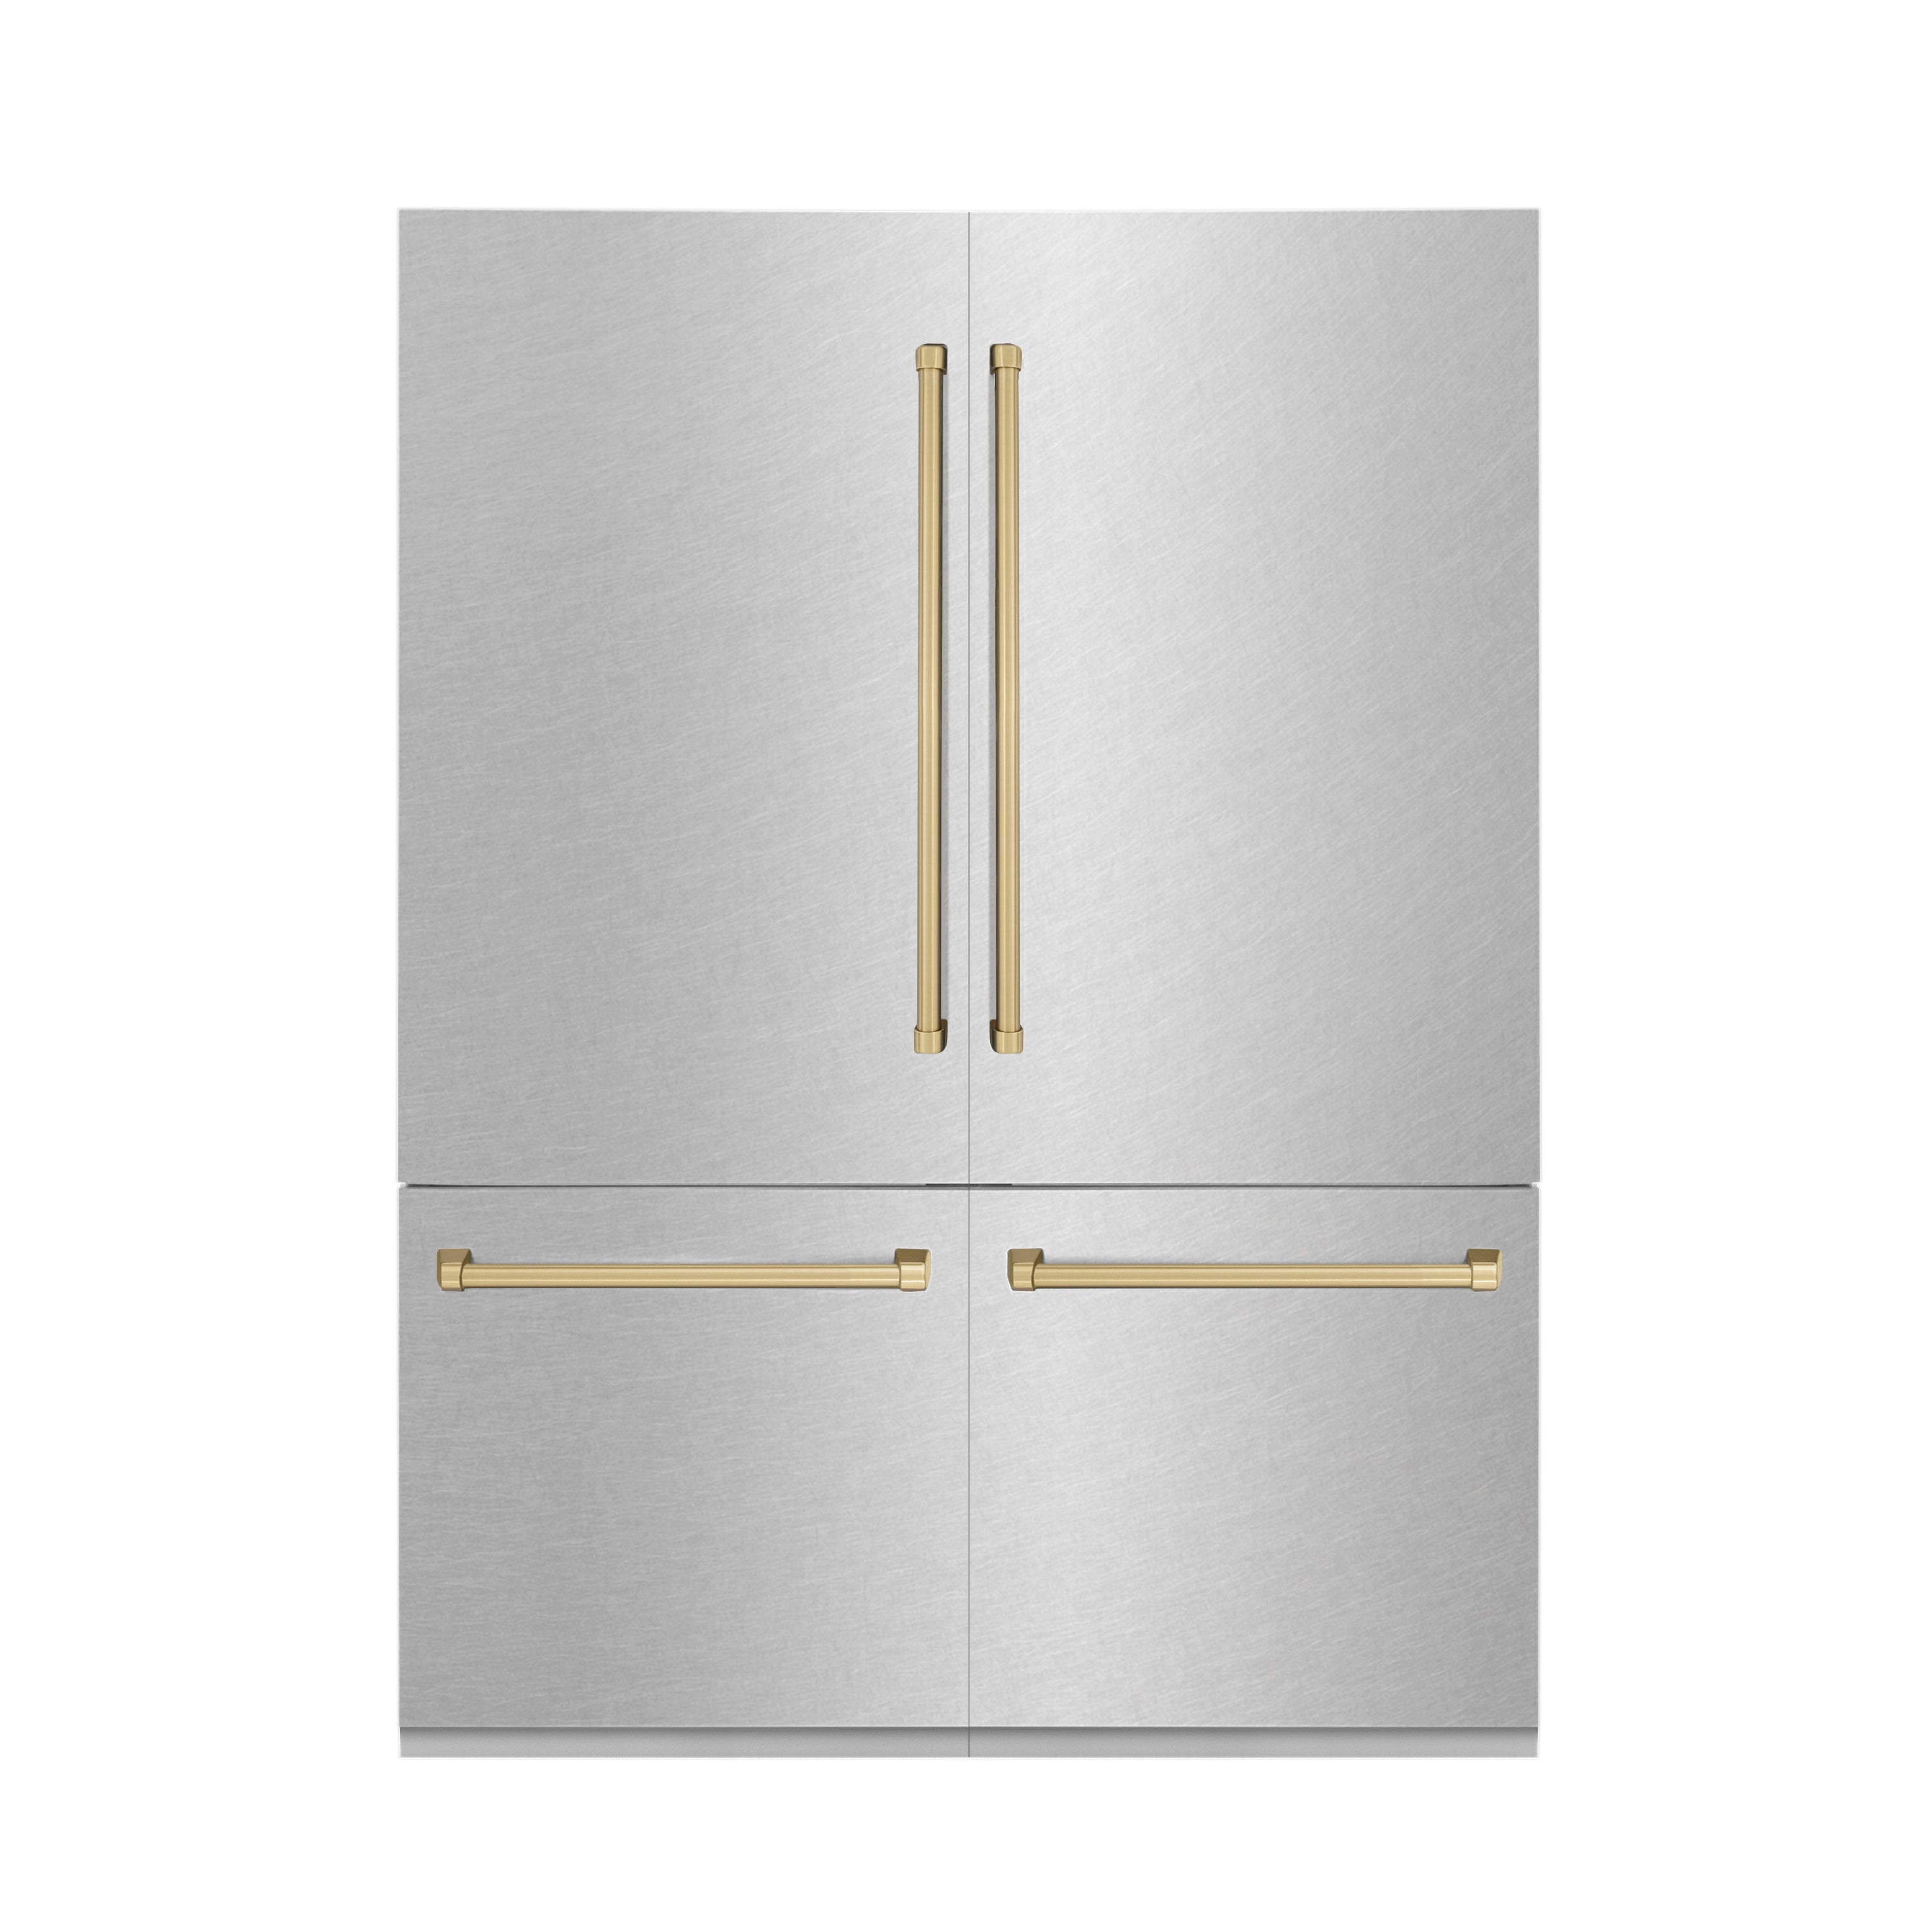 ZLINE 60" Autograph Edition 32.2 cu. ft. Built-in 4-Door French Door Refrigerator with Internal Water and Ice Dispenser in Fingerprint Resistant Stainless Steel with Champagne Bronze Accents (RBIVZ-SN-60-CB)